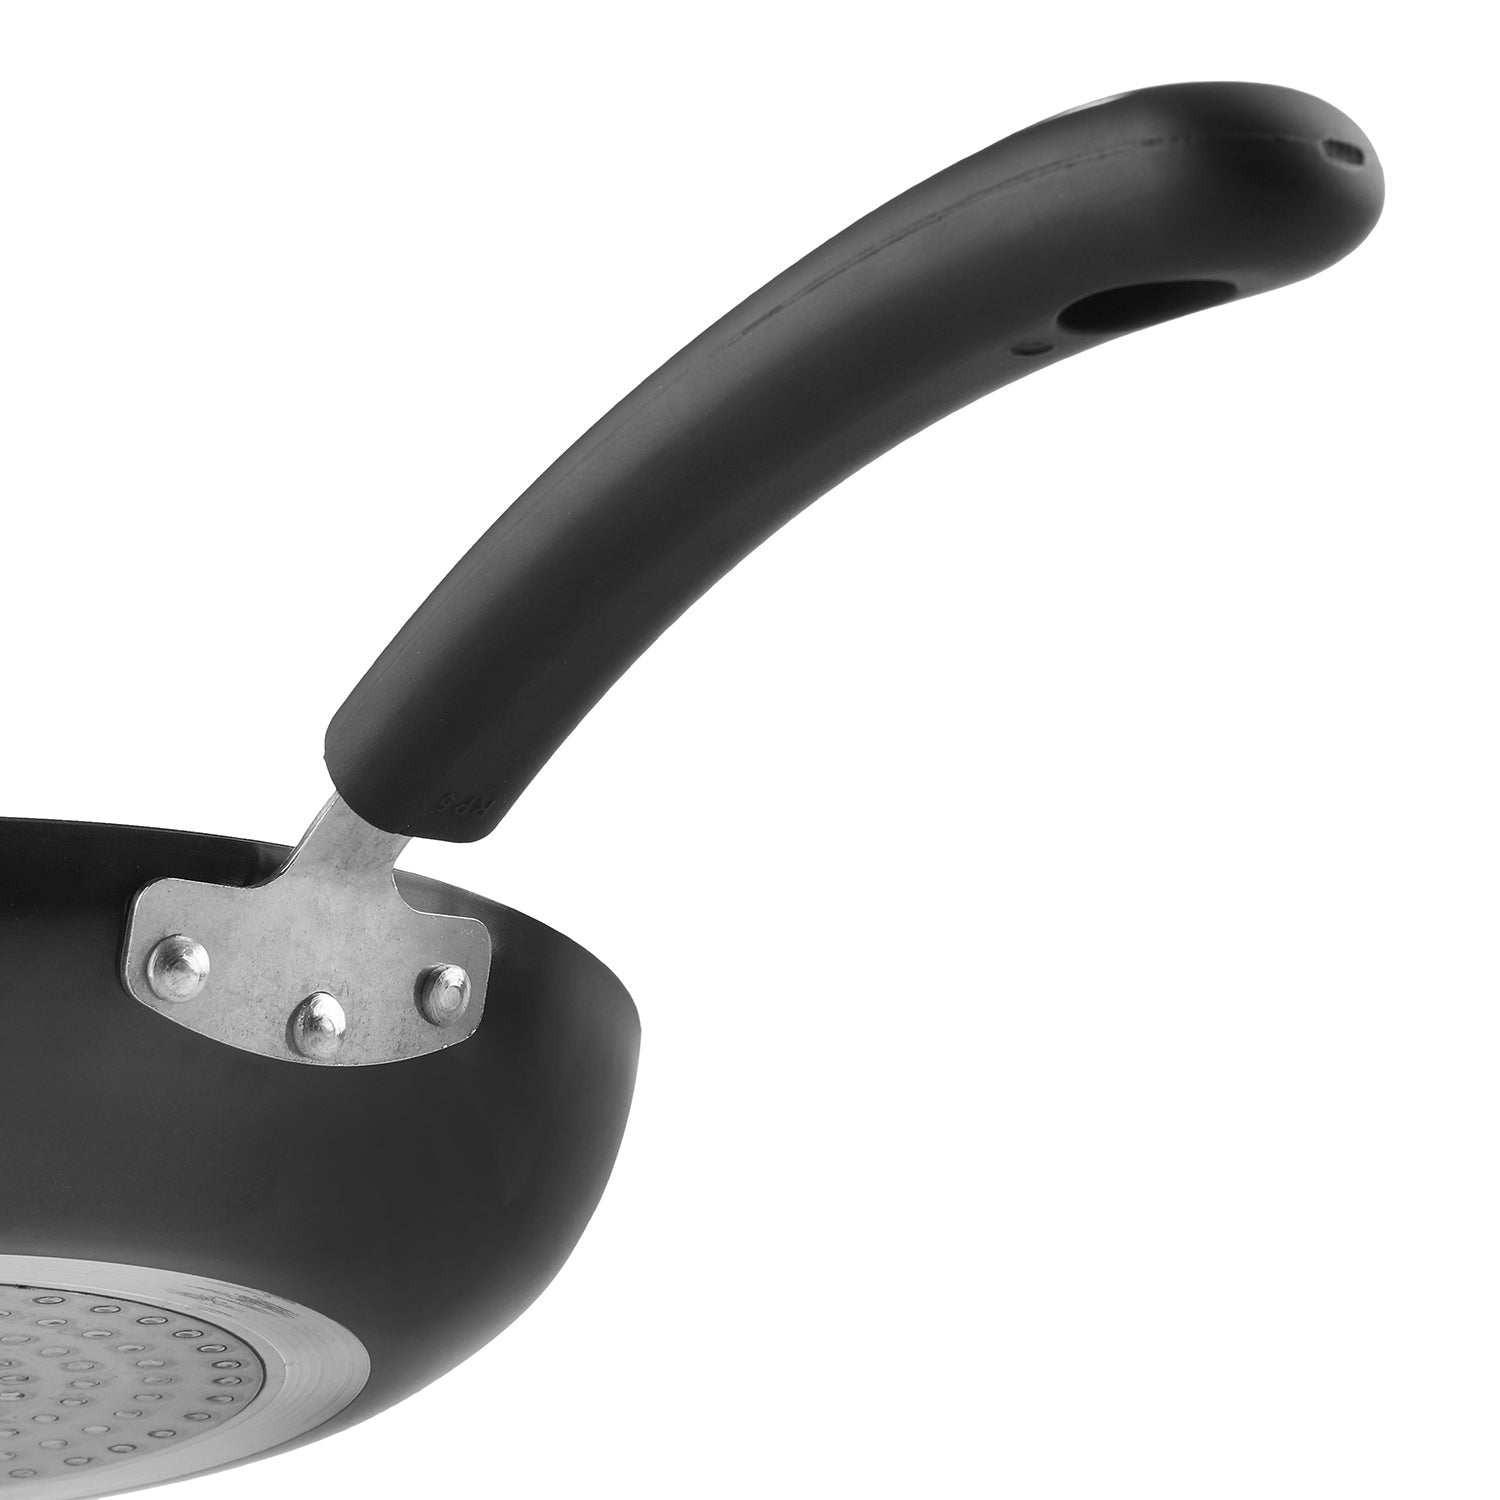 Triple Riveted Sturdy Handle of Hard Anodised Frypan